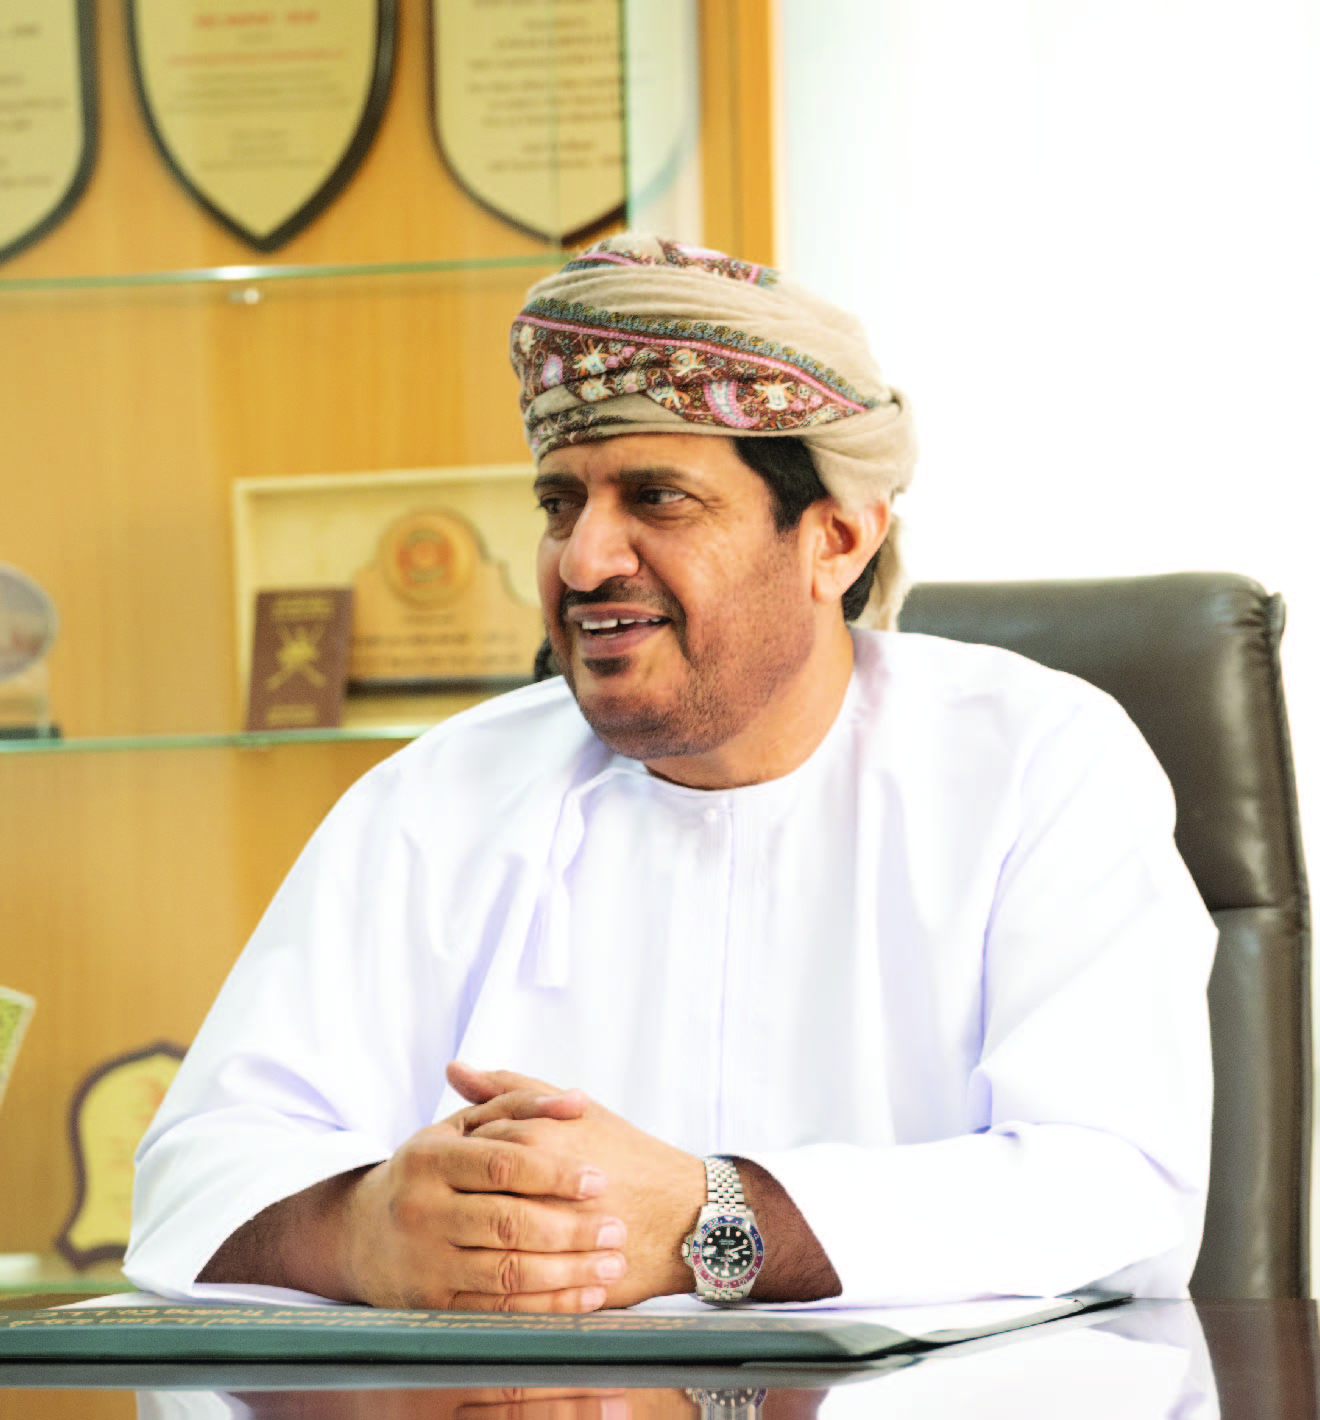 Voice of customer: Anwar Fahud Projects L.L.C., Muscat, Sultanate of Oman